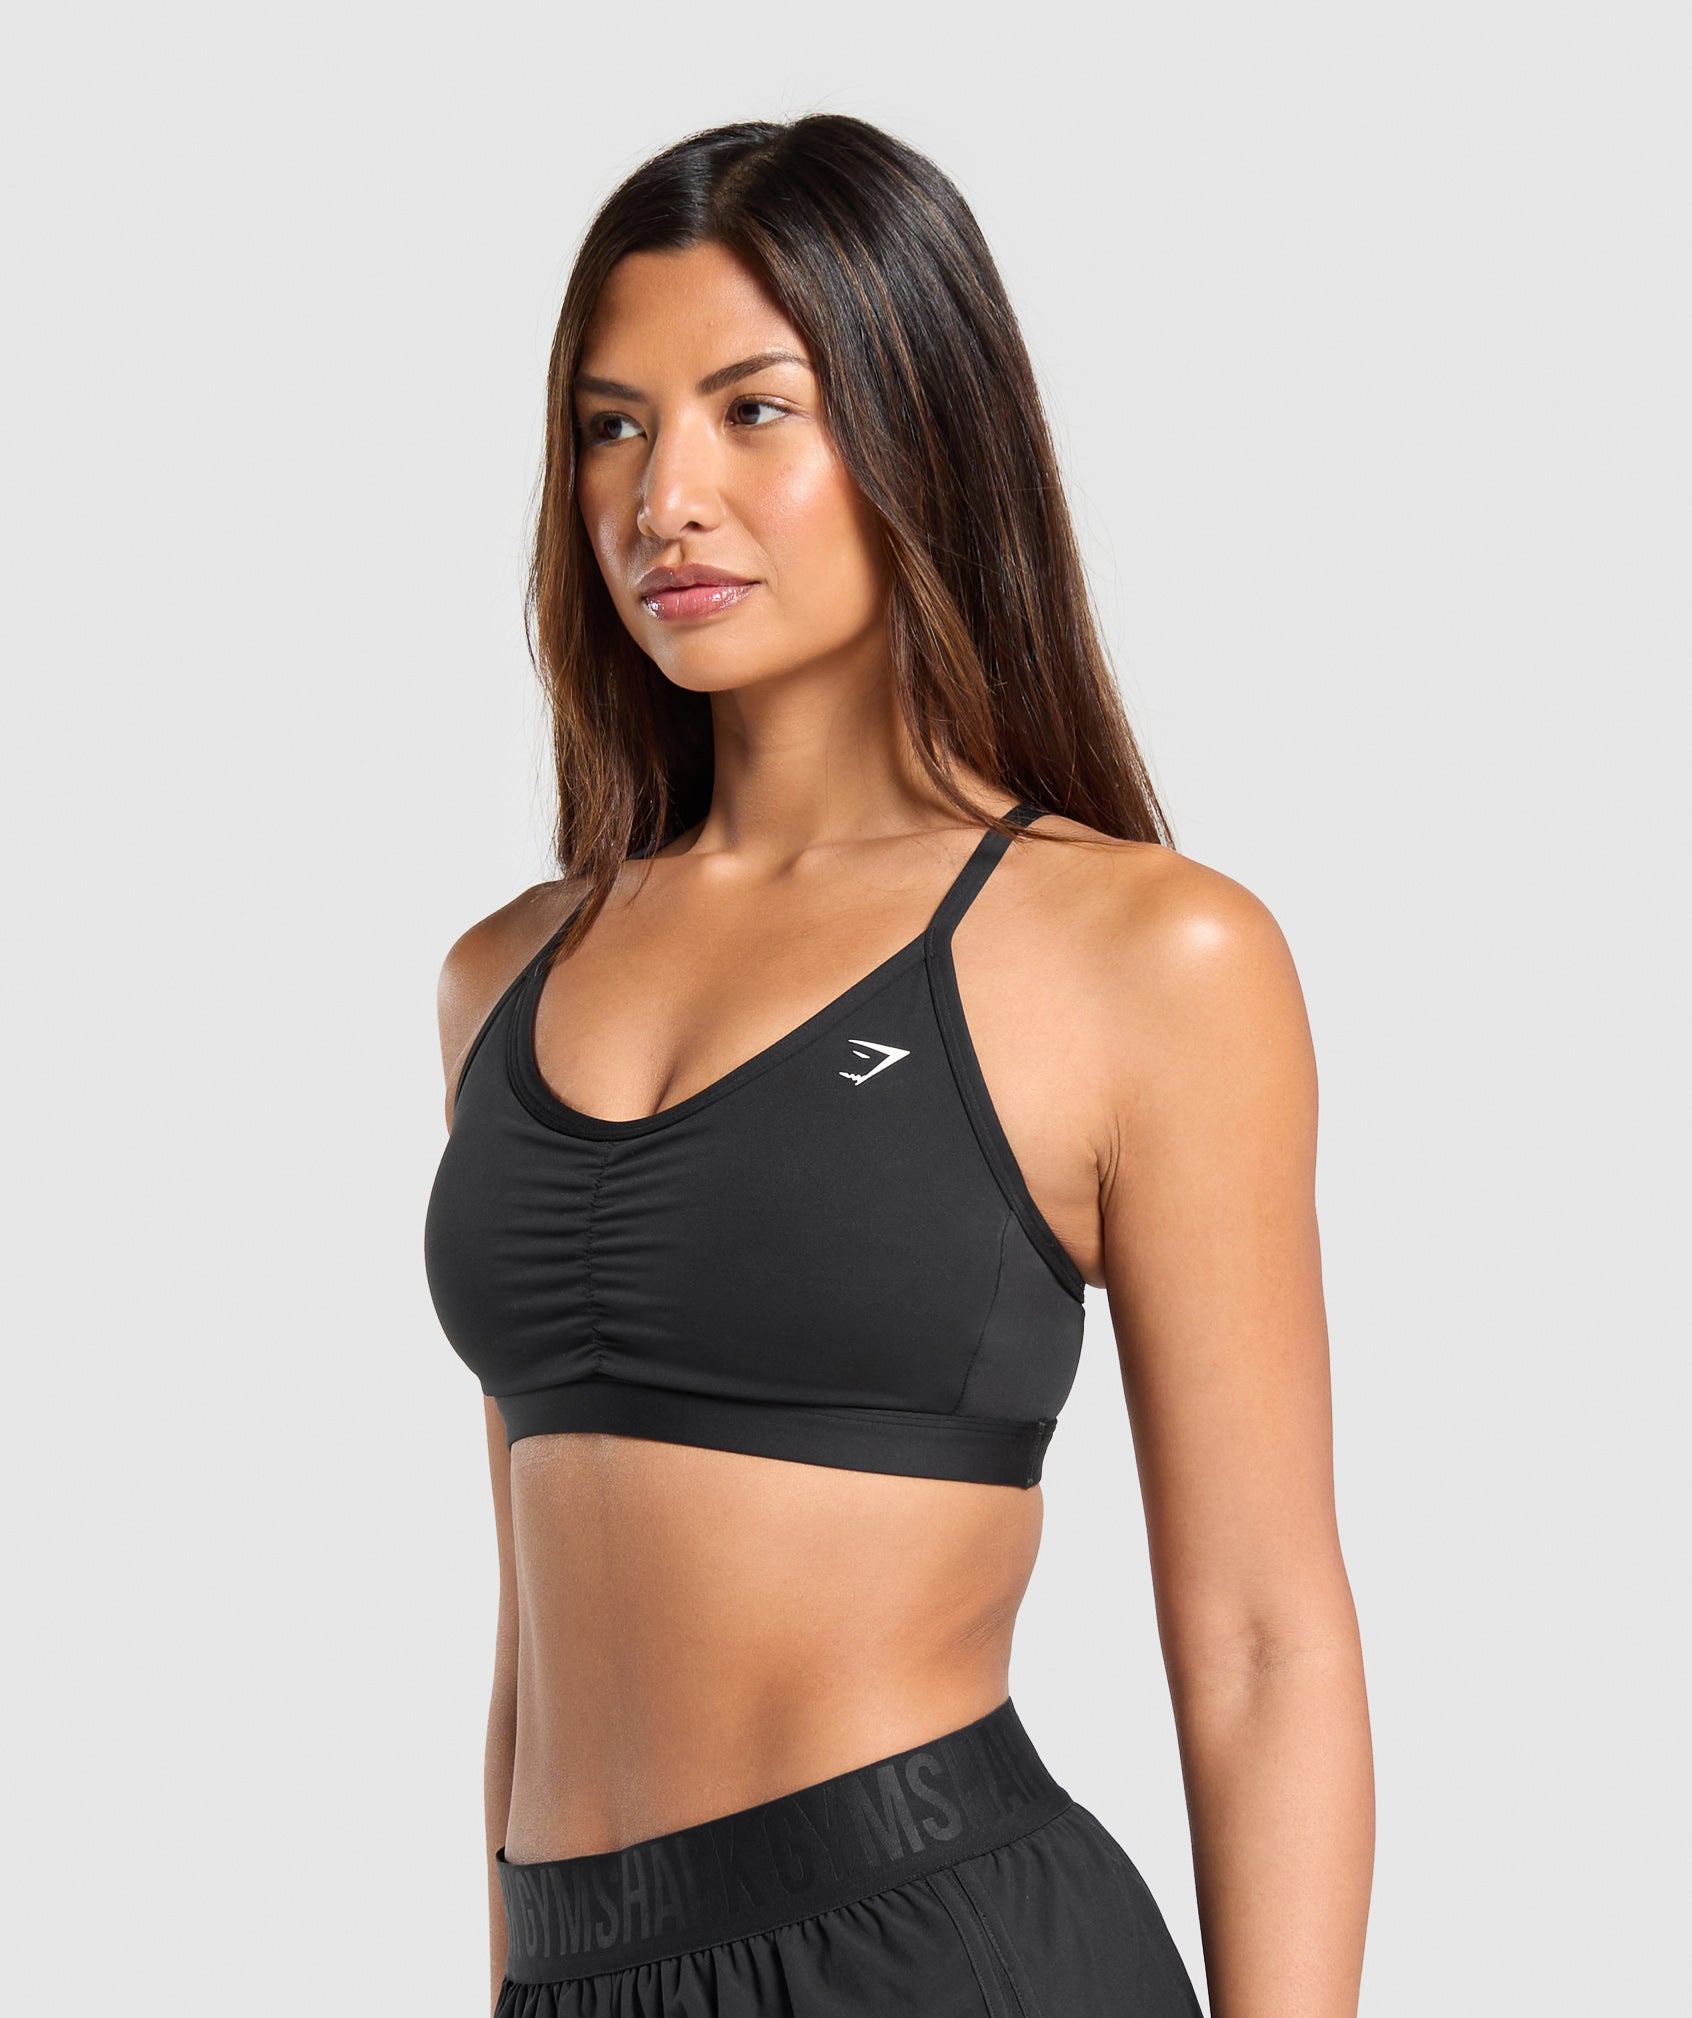 Ruched Sports Bra in Black - view 3